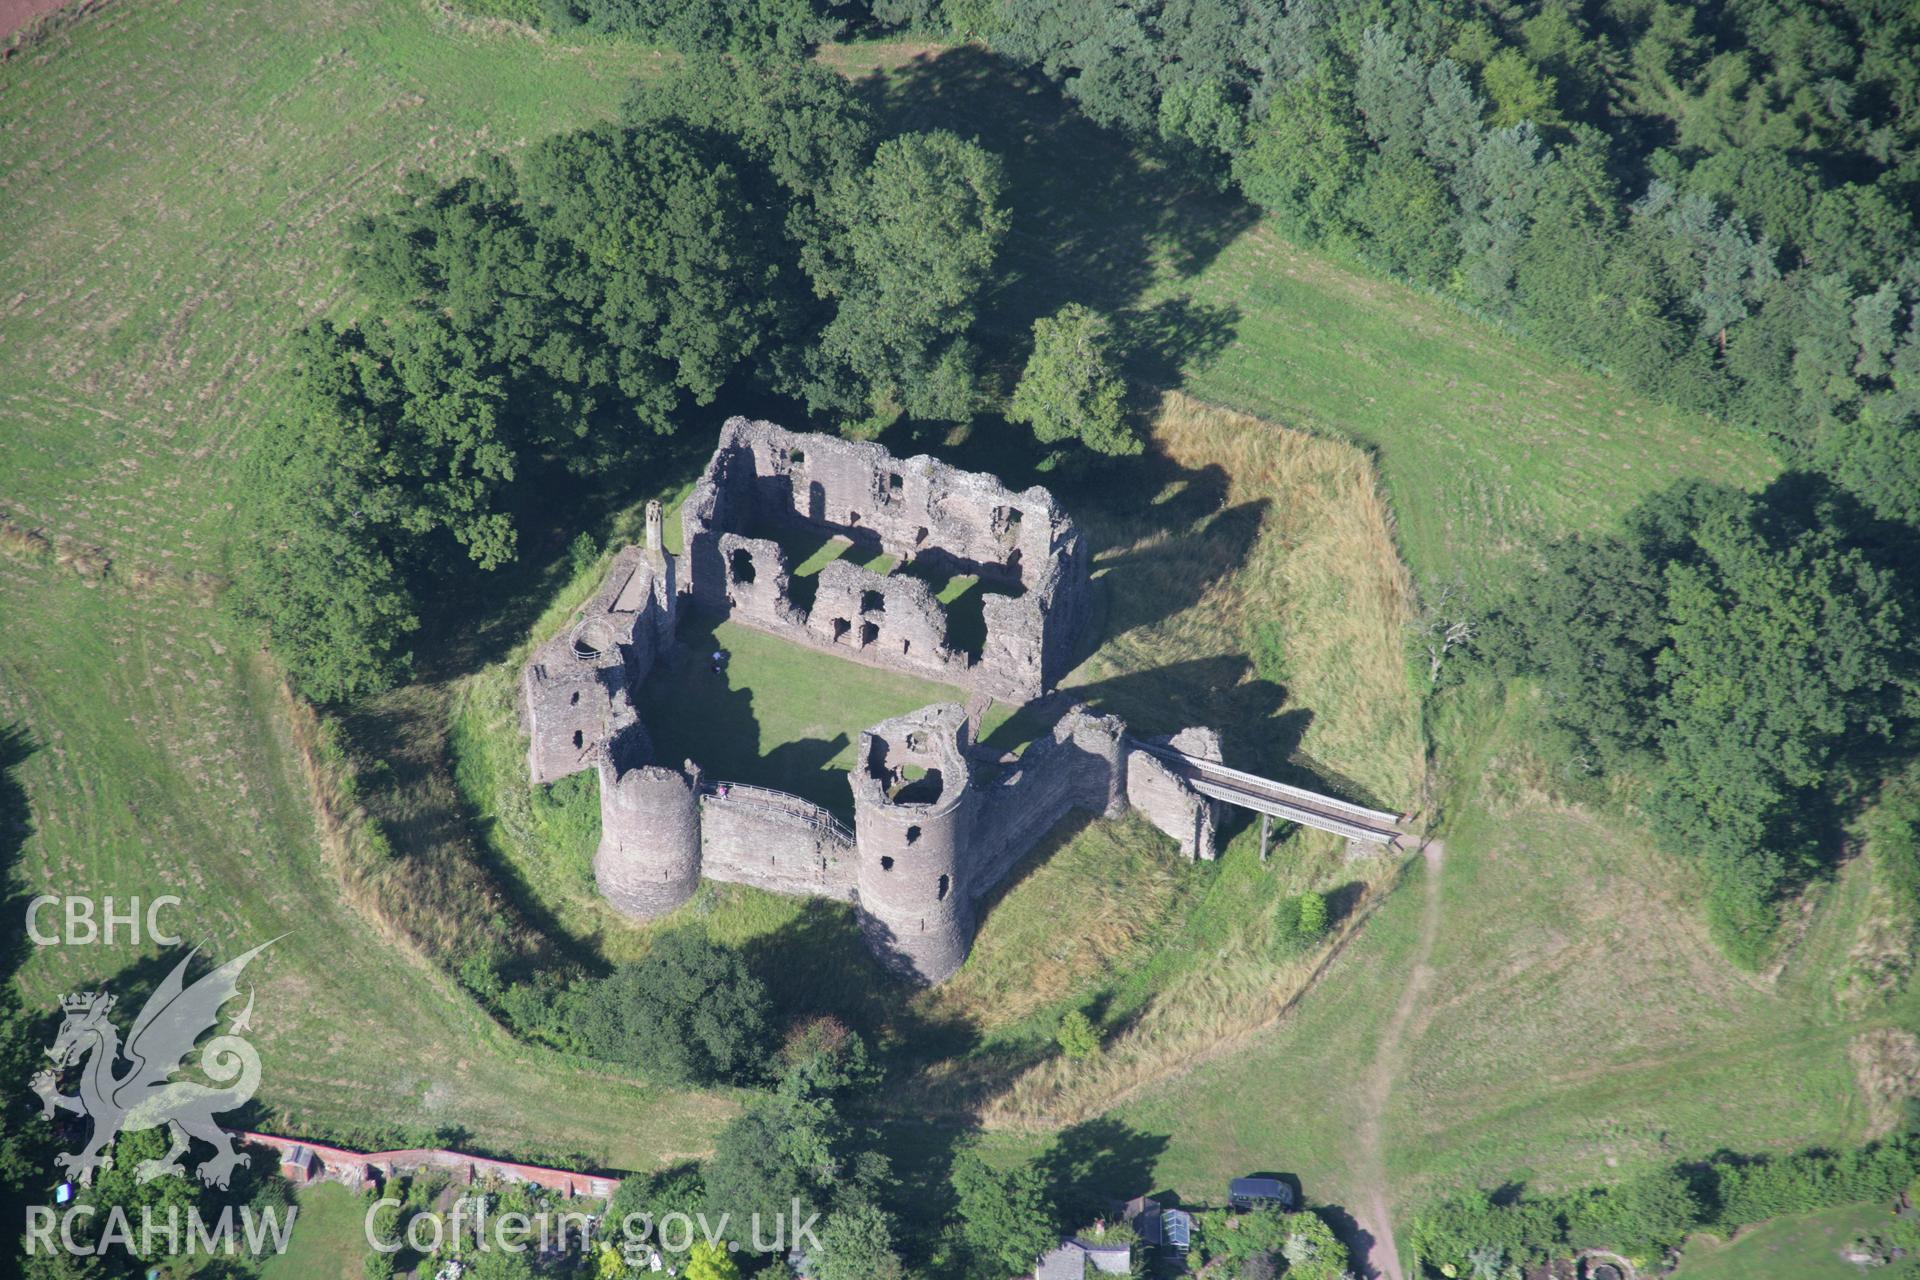 RCAHMW colour oblique aerial photograph of Grosmont Castle. Taken on 13 July 2006 by Toby Driver.